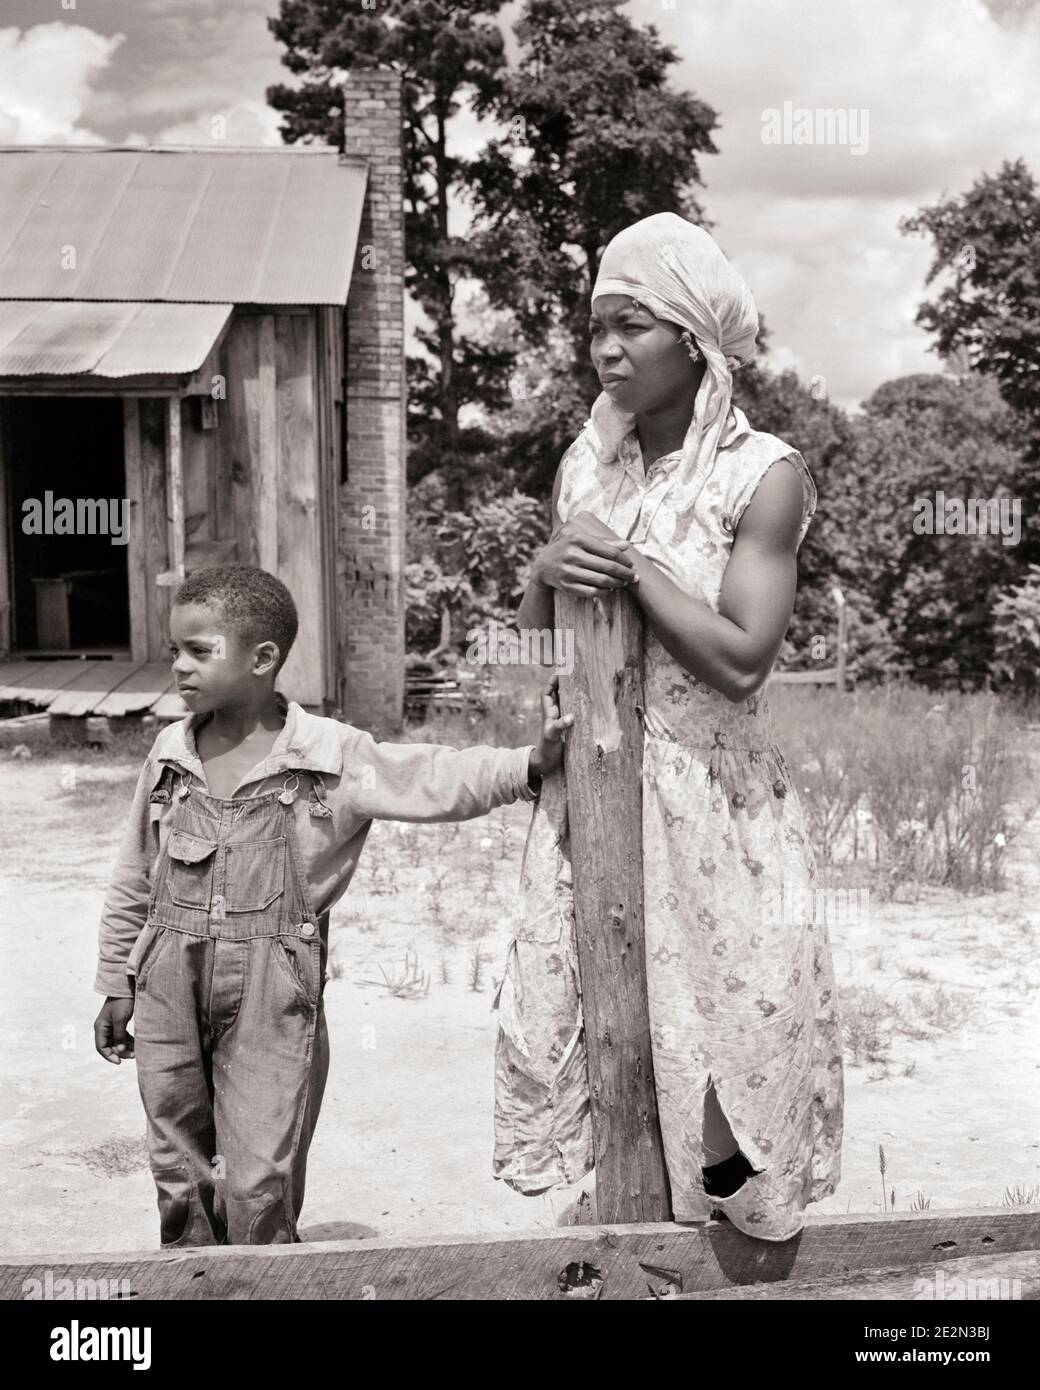 1930s AFRICAN-AMERICAN WOMAN MOTHER AND HER SON BOY STANDING BEFORE HOUSE BUILDING LEANING ON FARM FENCE POST ALABAMA USA - n73 HAR001 HARS LEANING OLD FASHION POVERTY 1 JUVENILE STYLE FEAR YOUNG ADULT SONS FAMILIES LIFESTYLE ARCHITECTURE FEMALES POOR RURAL HOME LIFE COPY SPACE HALF-LENGTH LADIES PERSONS FARMING MALES ALABAMA BUILDINGS AGRICULTURE B&W FREEDOM BEFORE DREAMS PROPERTY STRENGTH AFRICAN-AMERICANS AFRICAN-AMERICAN AND FARMERS SOUTHEAST BLACK ETHNICITY SOUTHERN REAL ESTATE CONNECTION CONCEPTUAL STRUCTURES RAGGED DISADVANTAGED EDIFICE DISAFFECTED DISAPPOINTED DISCONNECTED IMPOVERISHED Stock Photo